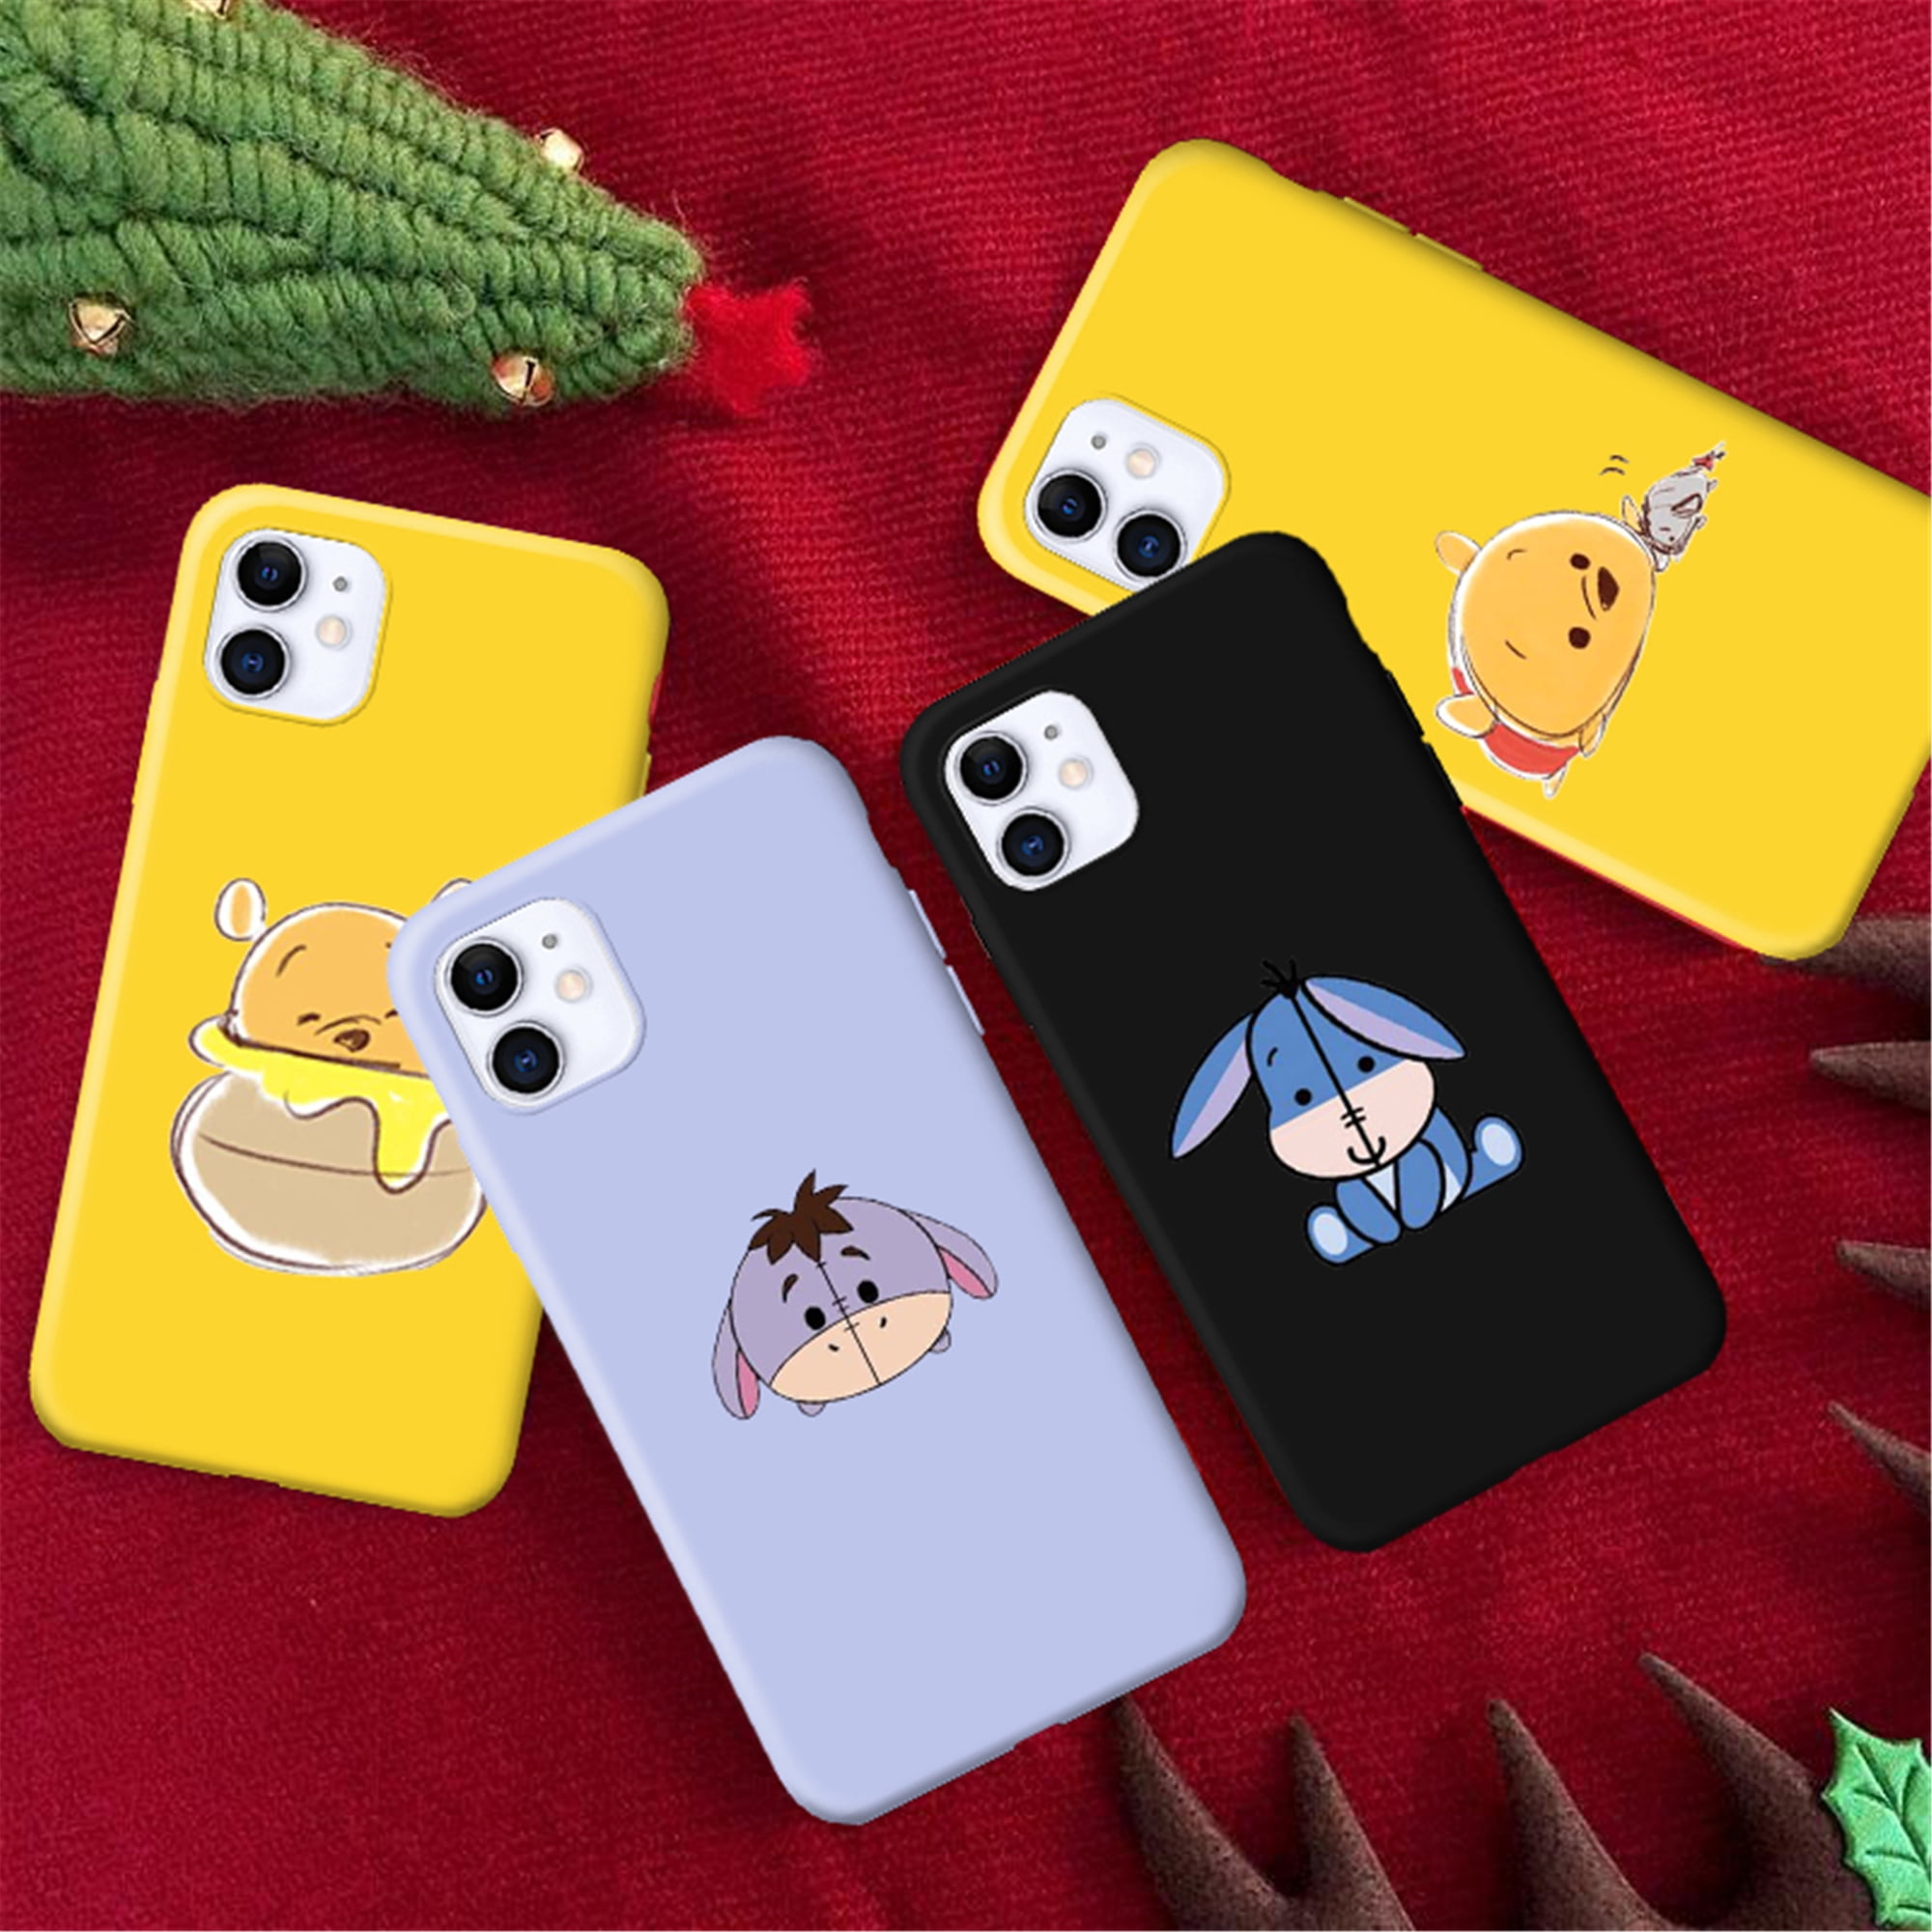 Snoopy iPhone 12 case Galaxy Note 20 case iPhone 11 case iPhone Xs case Galaxy S9 case Galaxy S8 case iPhone Xs case iPhone 8 case Galaxy S7